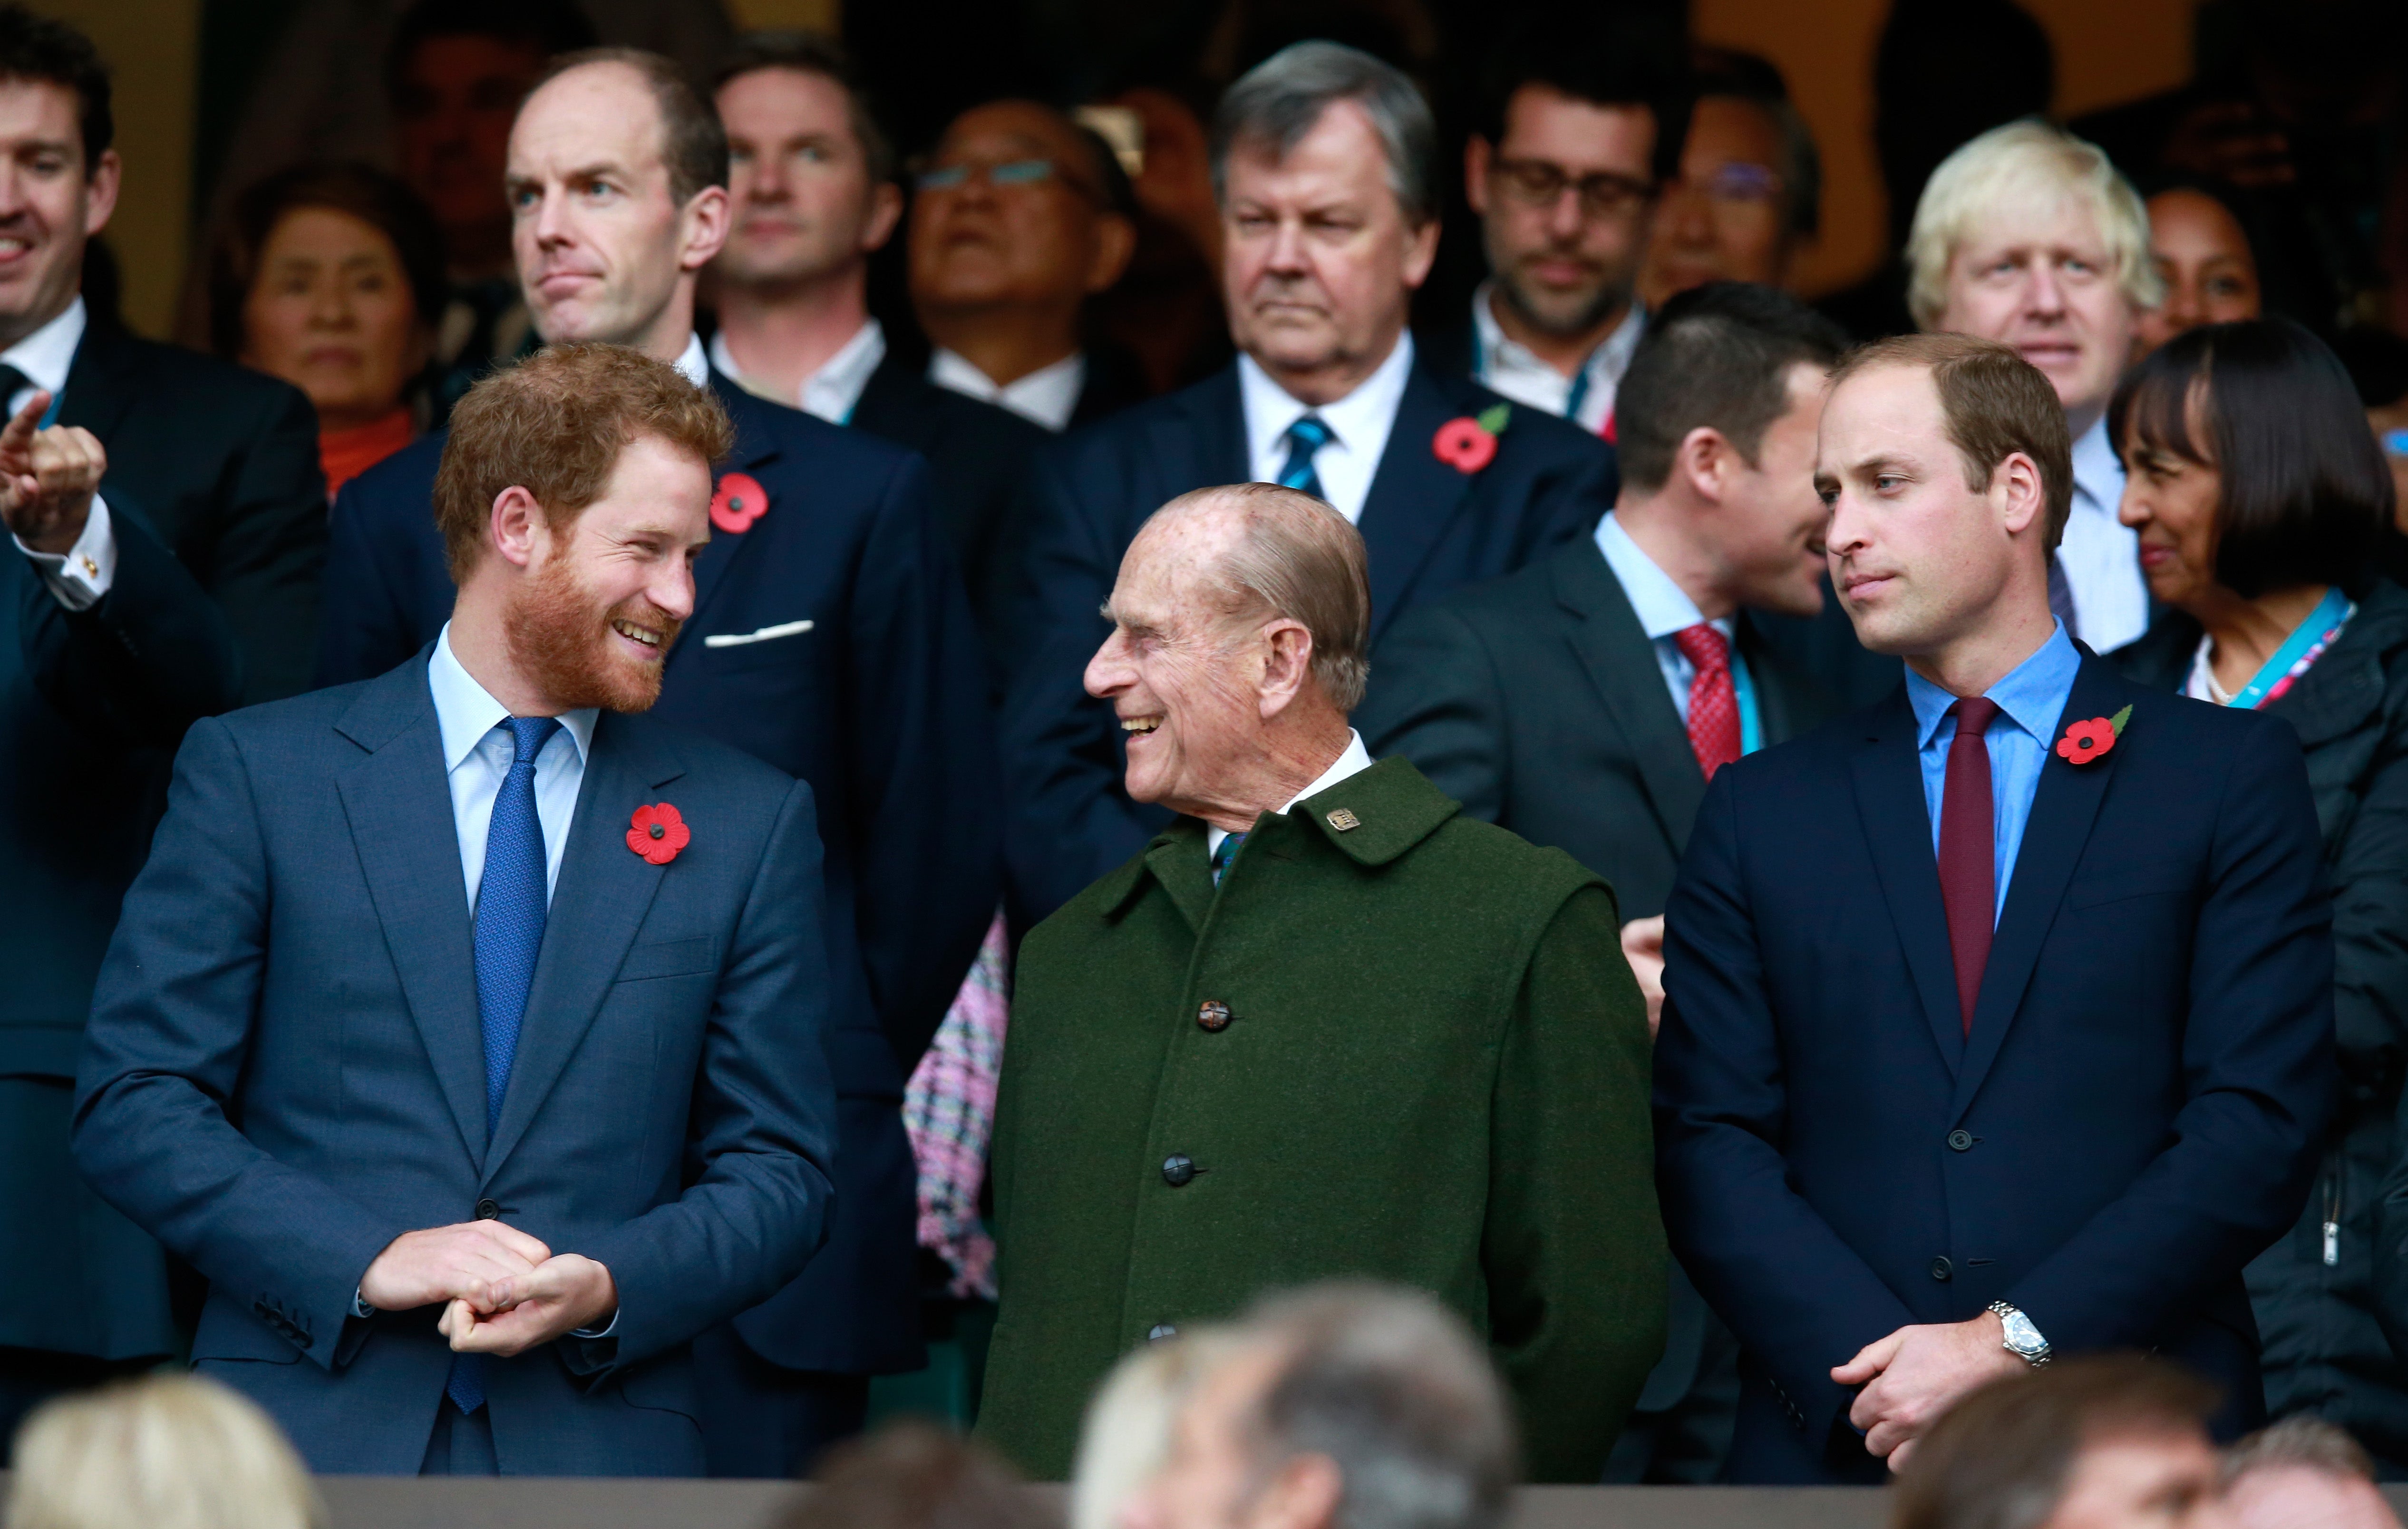 Prince Harry, Prince Phillip and Prince William enjoy the atmosphere during the 2015 Rugby World Cup Final